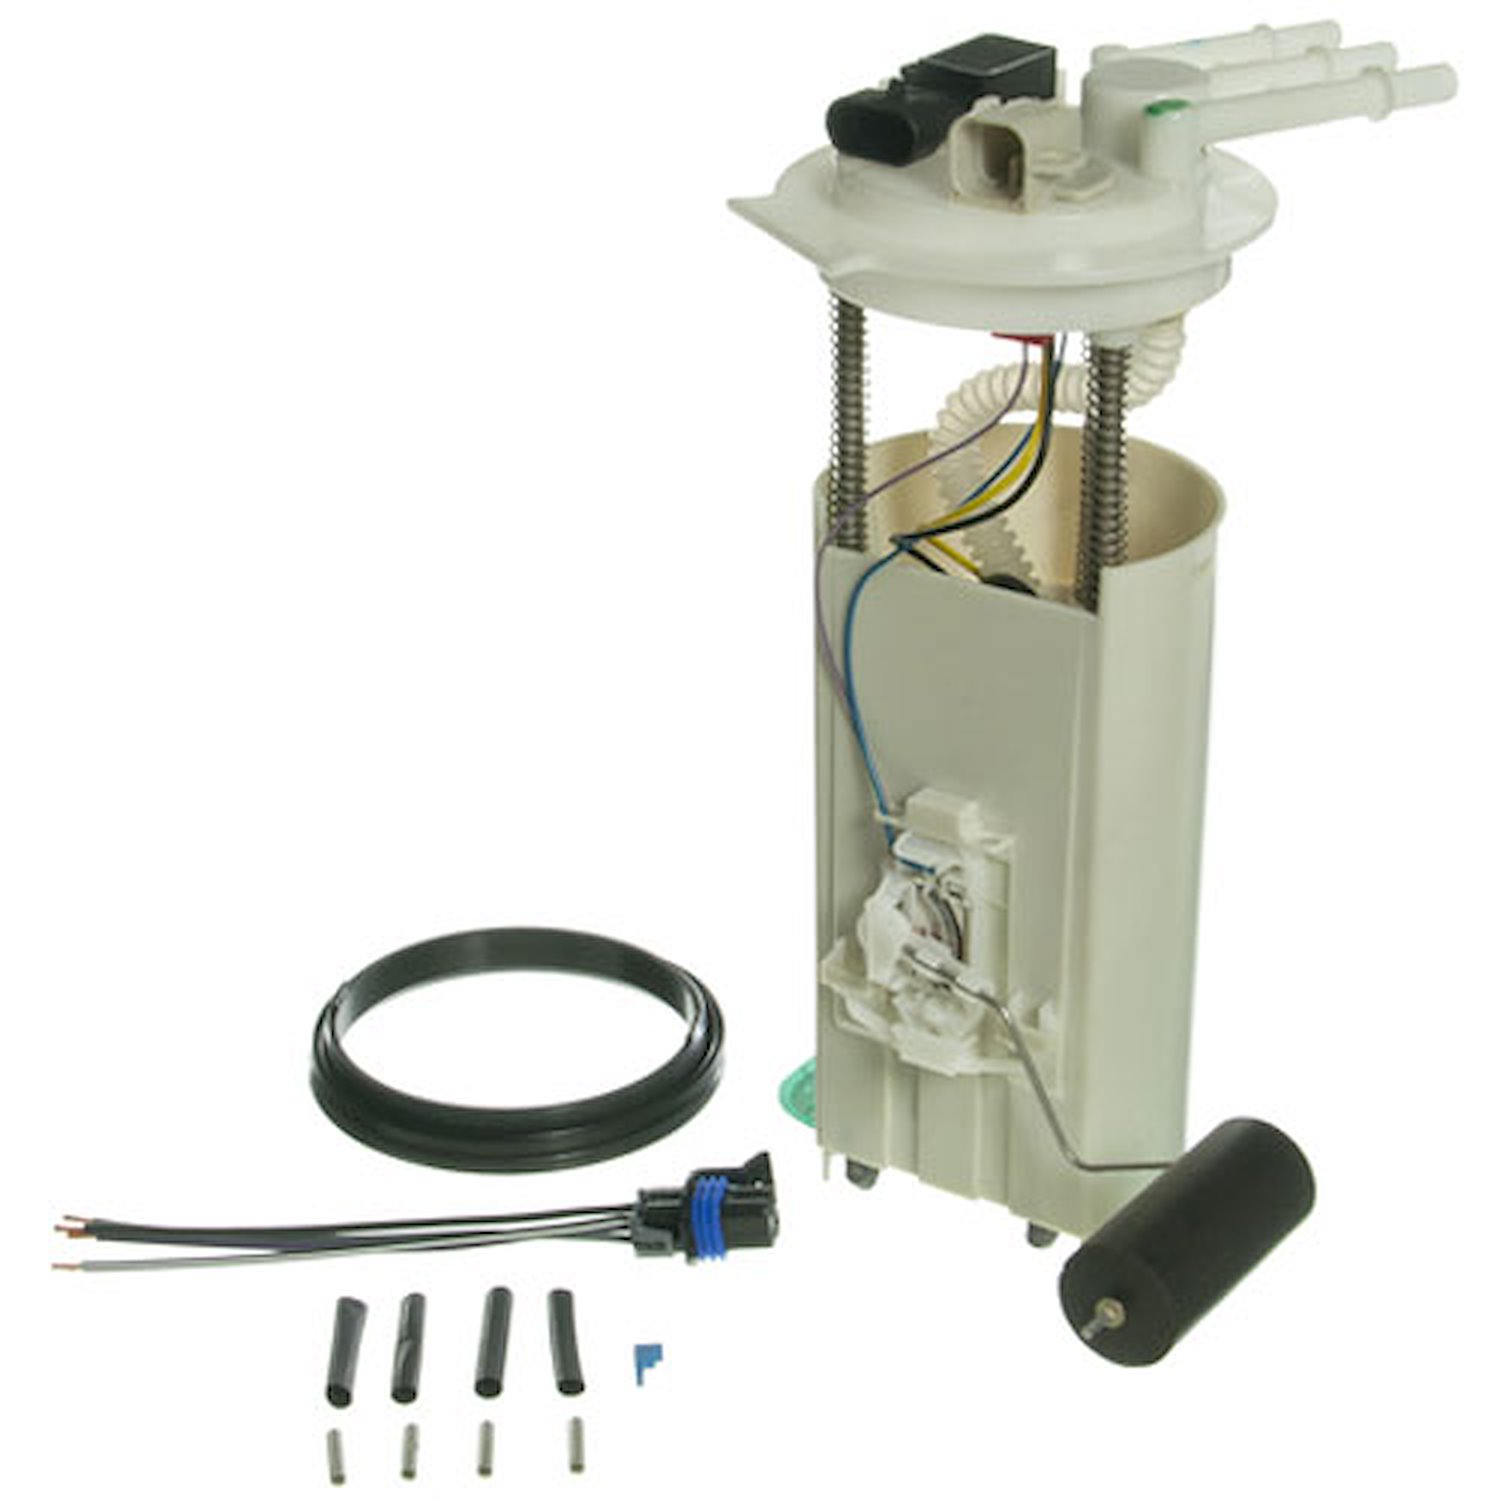 OE GM Replacement Electric Fuel Pump Module Assembly 2002-03 Buick Rendezvous 3.4L V6